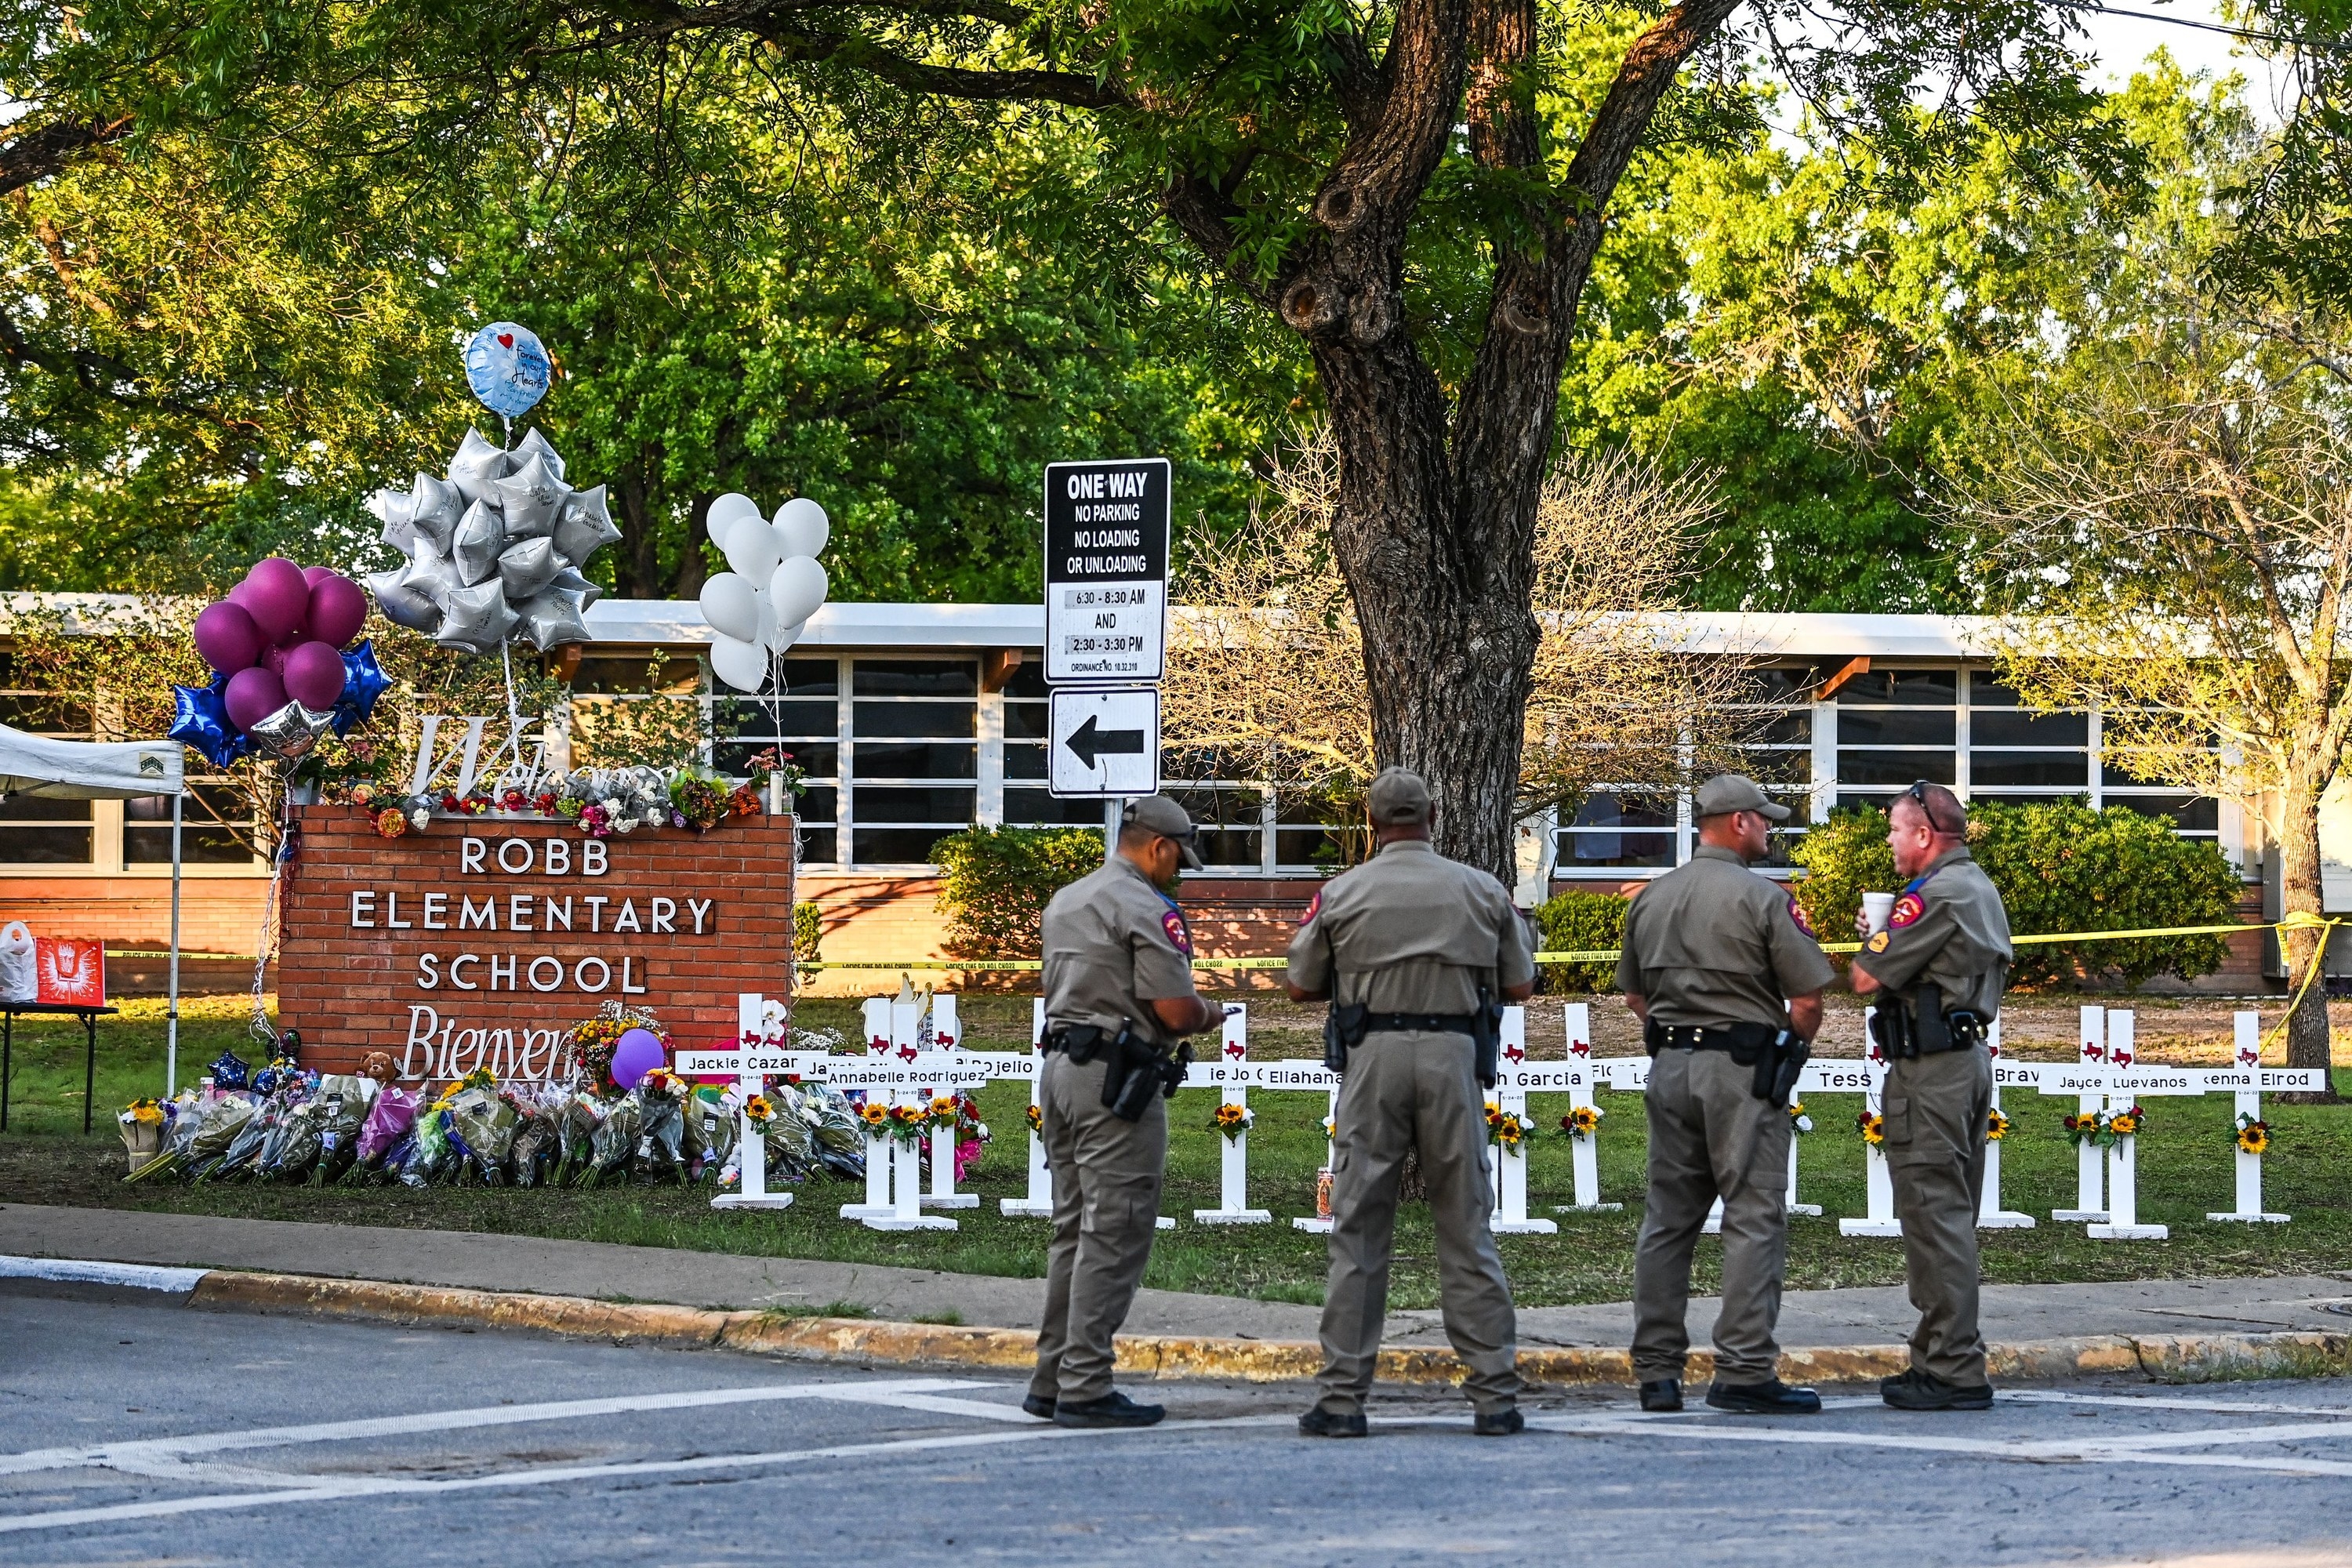 Police officers stand near a makeshift memorial for the shooting victims at Robb Elementary School in Uvalde, Texas, on May 26, 2022